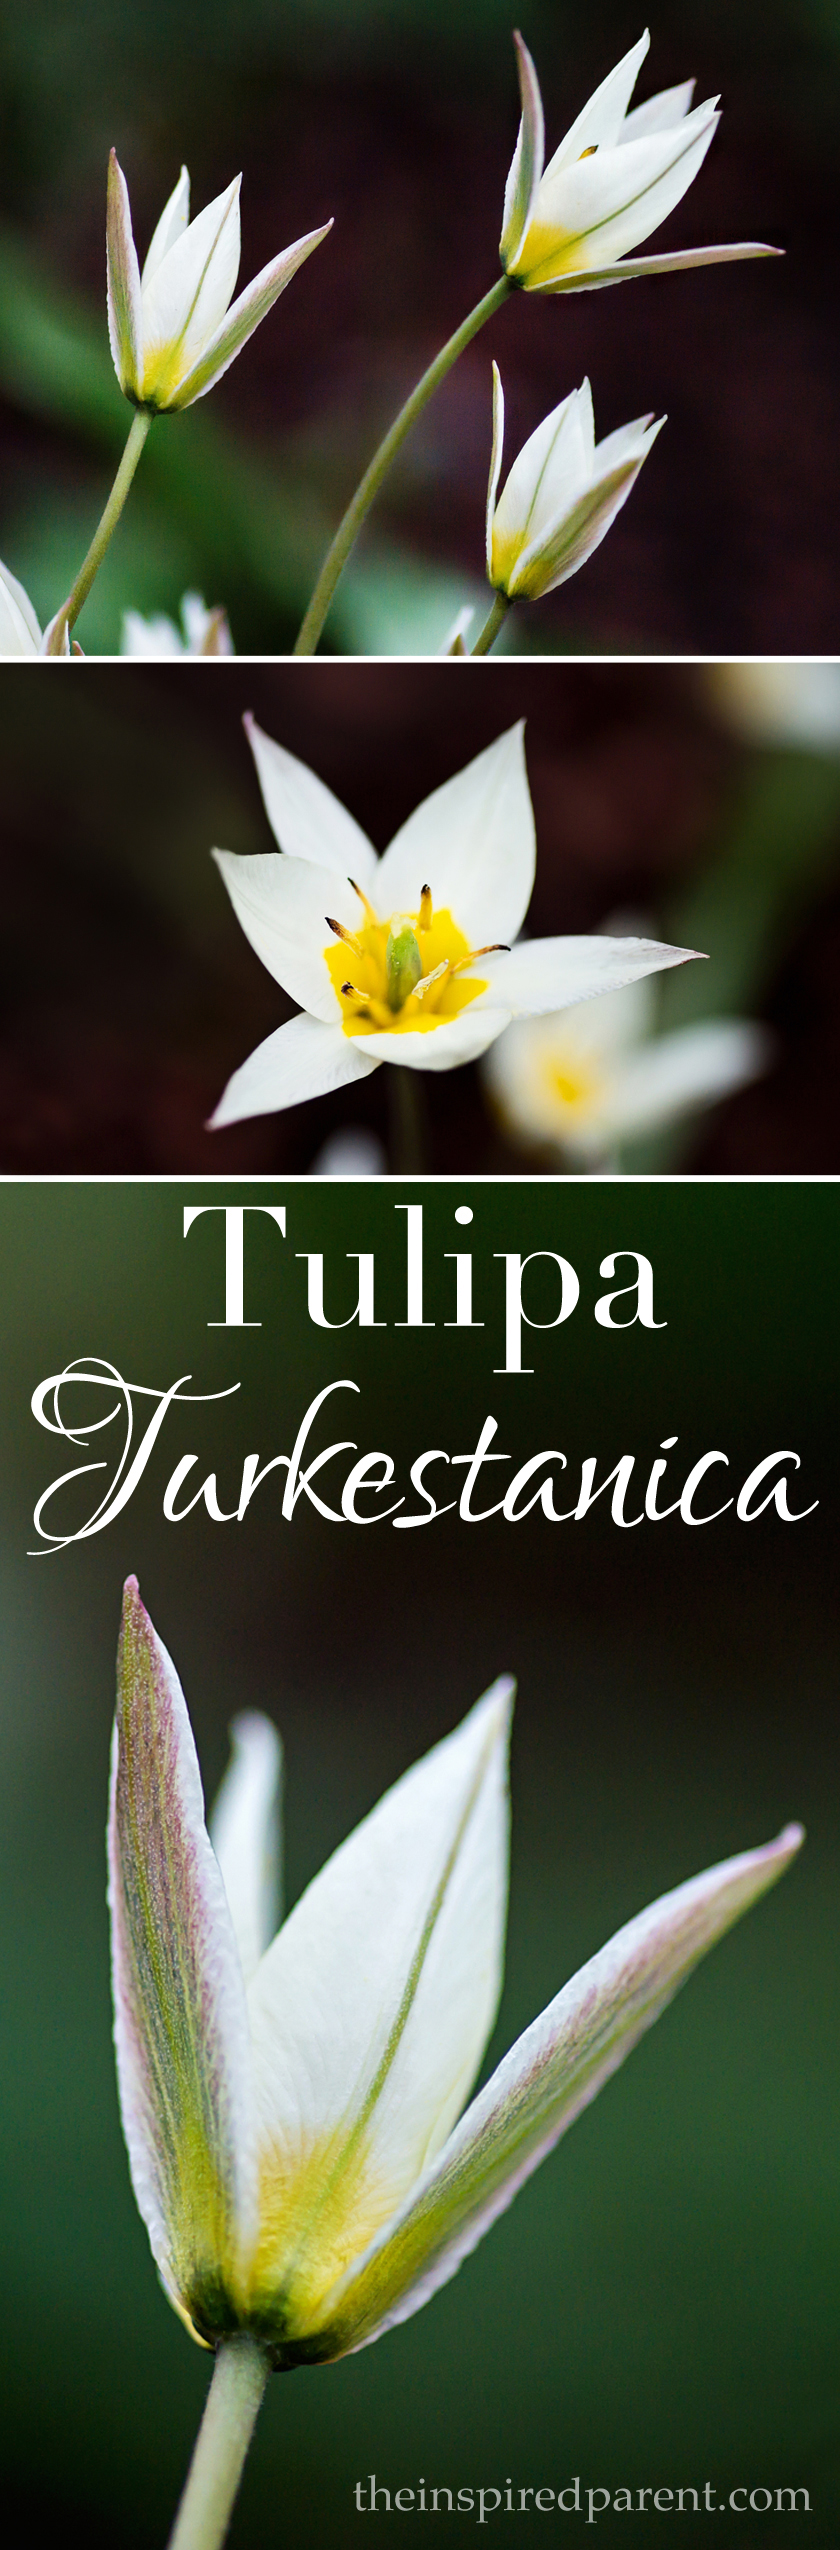 Early Blooming Tulipa Turkestanica The Inspired Parent